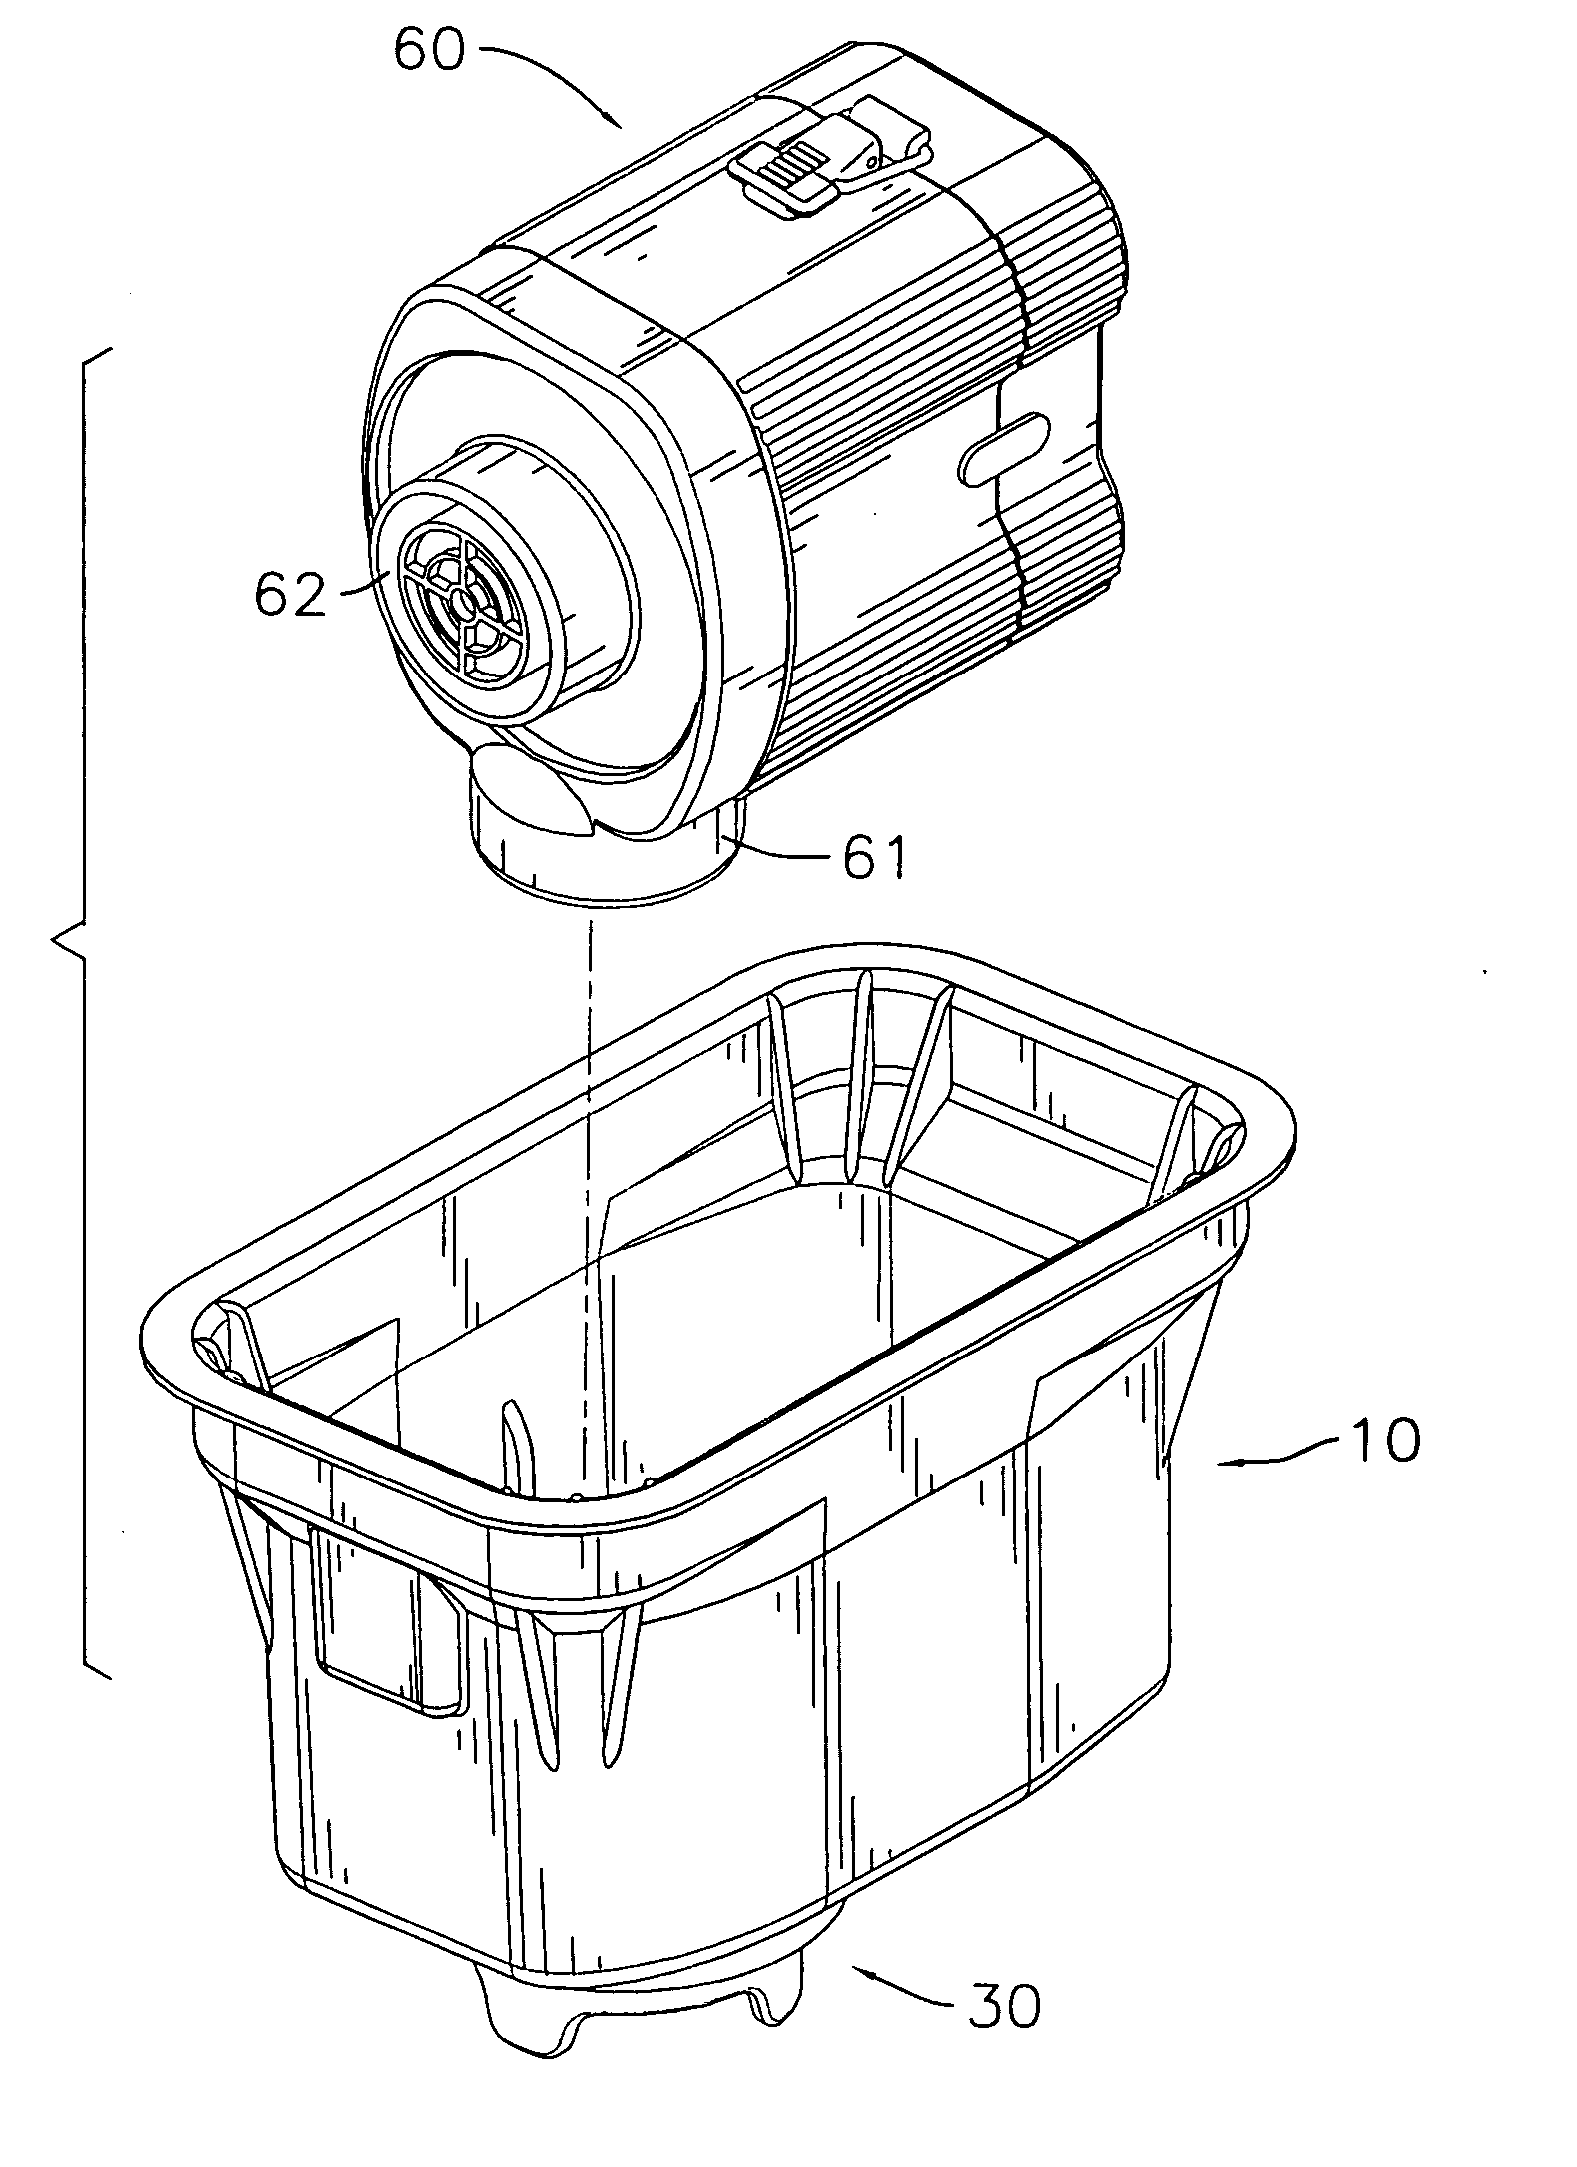 Bidirectional air pump assembly for inflatable objects